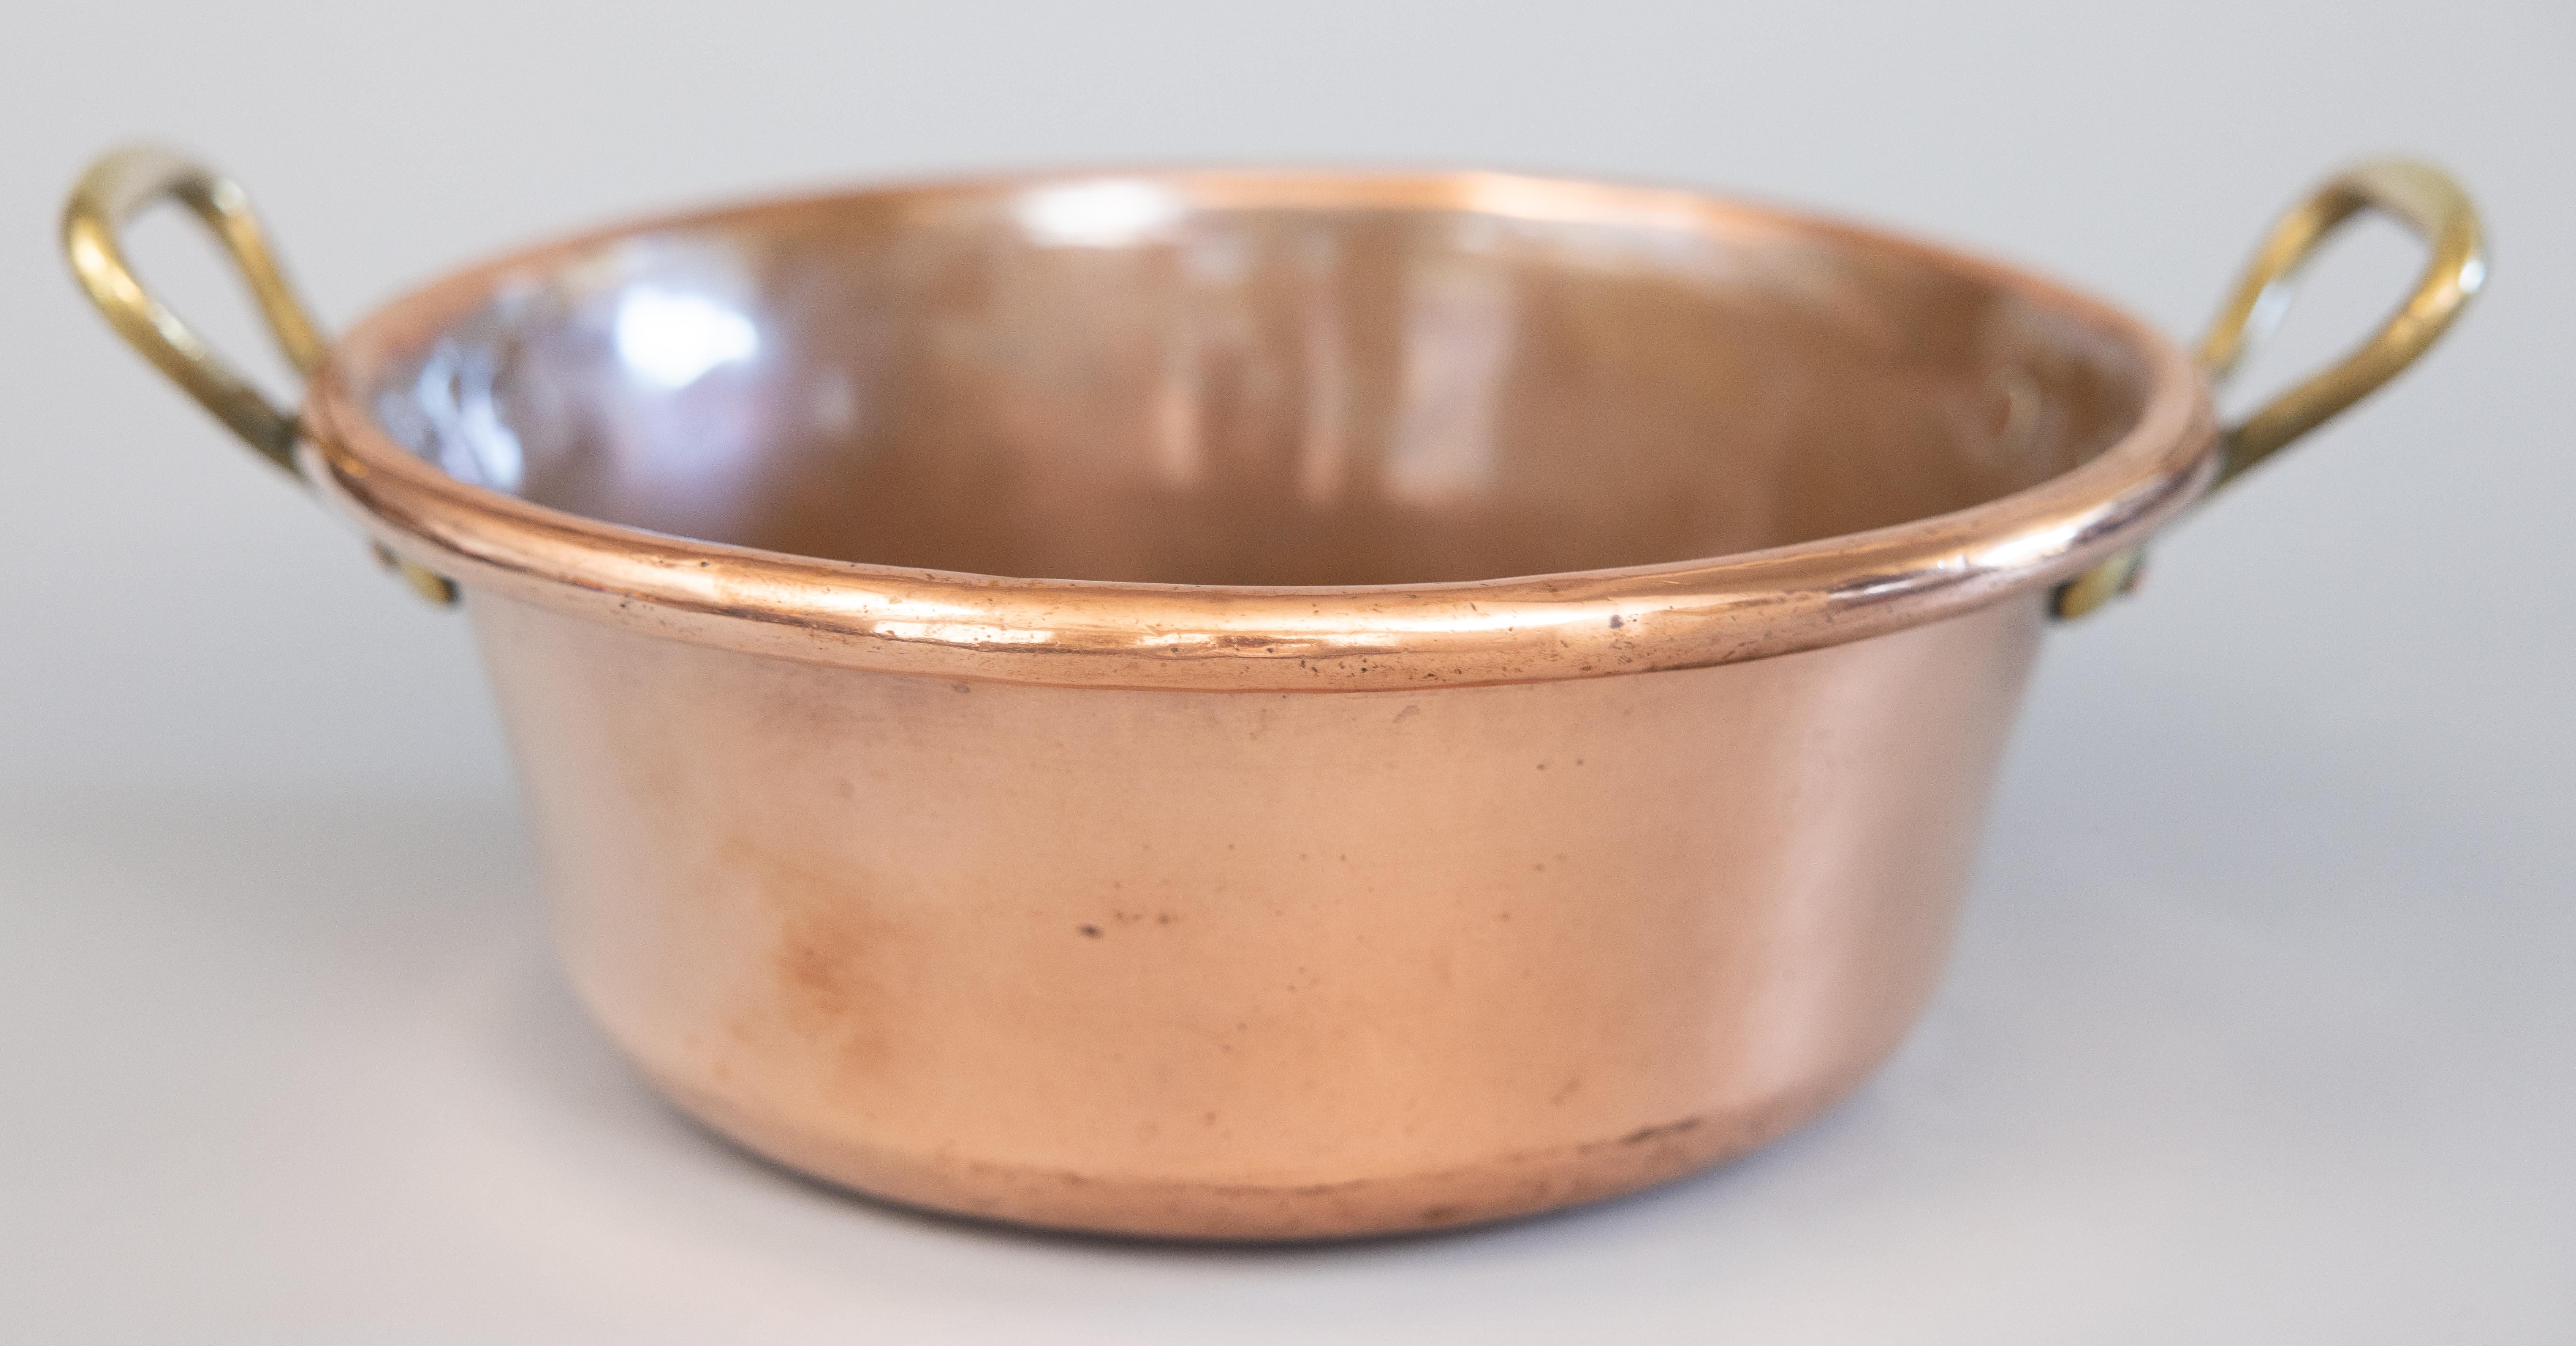 A gorgeous antique hand forged French copper pot, circa 1900. This fine pot is handcrafted of solid copper, large and heavy, with charming brass handles and a beautiful patina. It would be lovely displayed on its own, filled with decorative items,